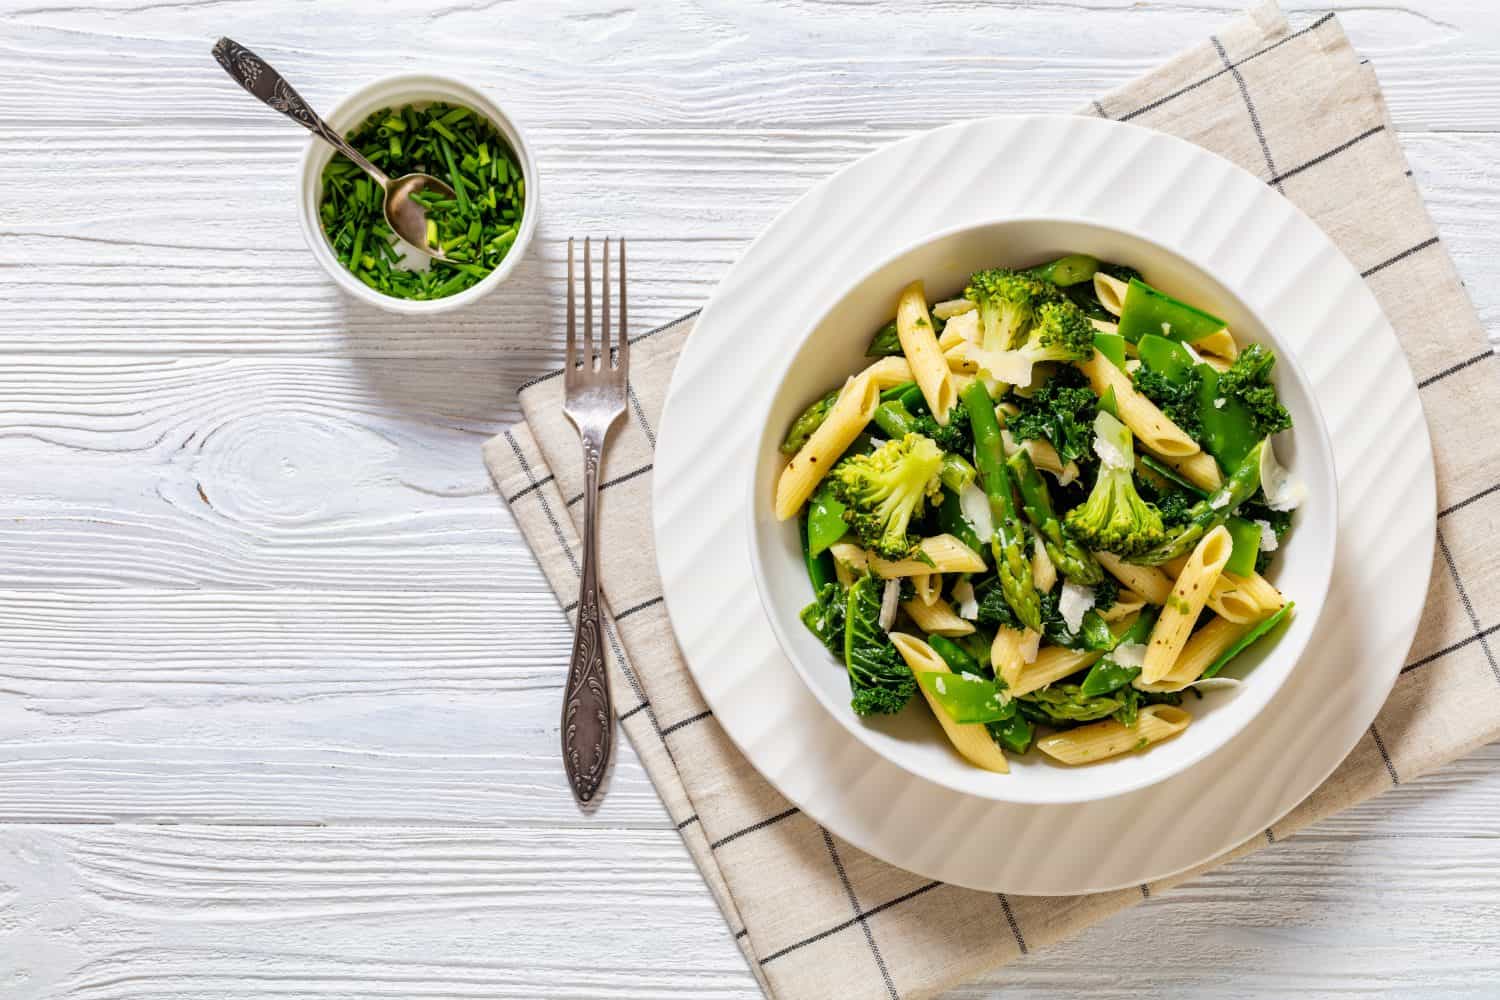 Pasta primavera with asparagus, snap peas, broccoli and kale in white bowl, on white wood table, horizontal view from above, flat lay, free space